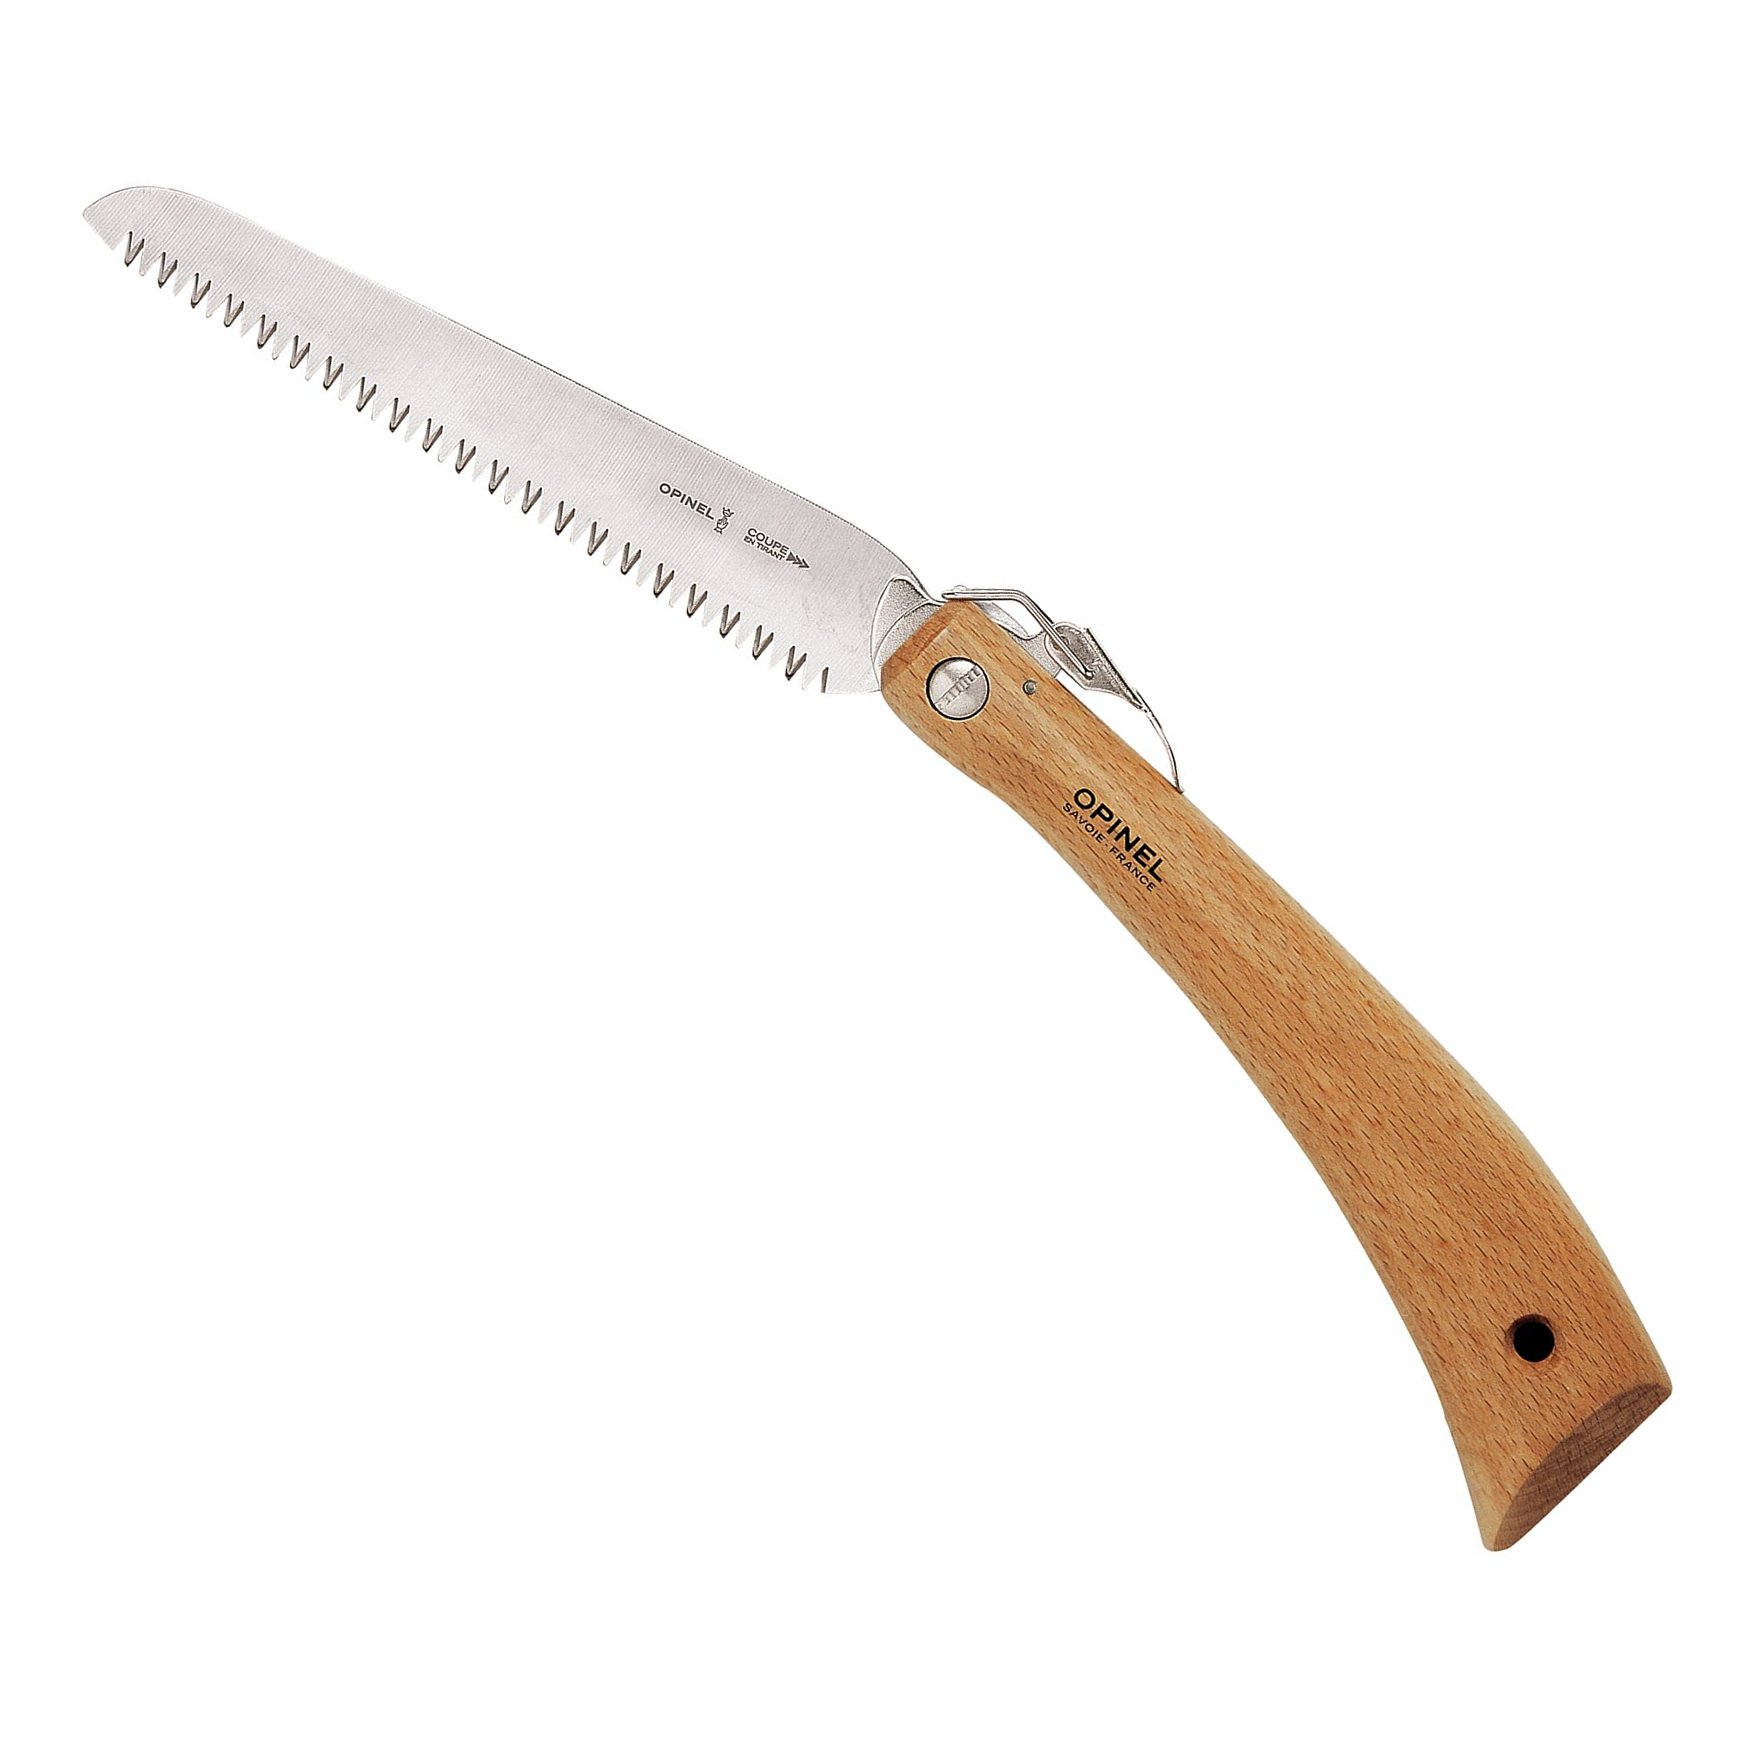 OPINEL 180 Folding Saw 18cm stainless steel pruning saw with safety clip - official Opinel stockist